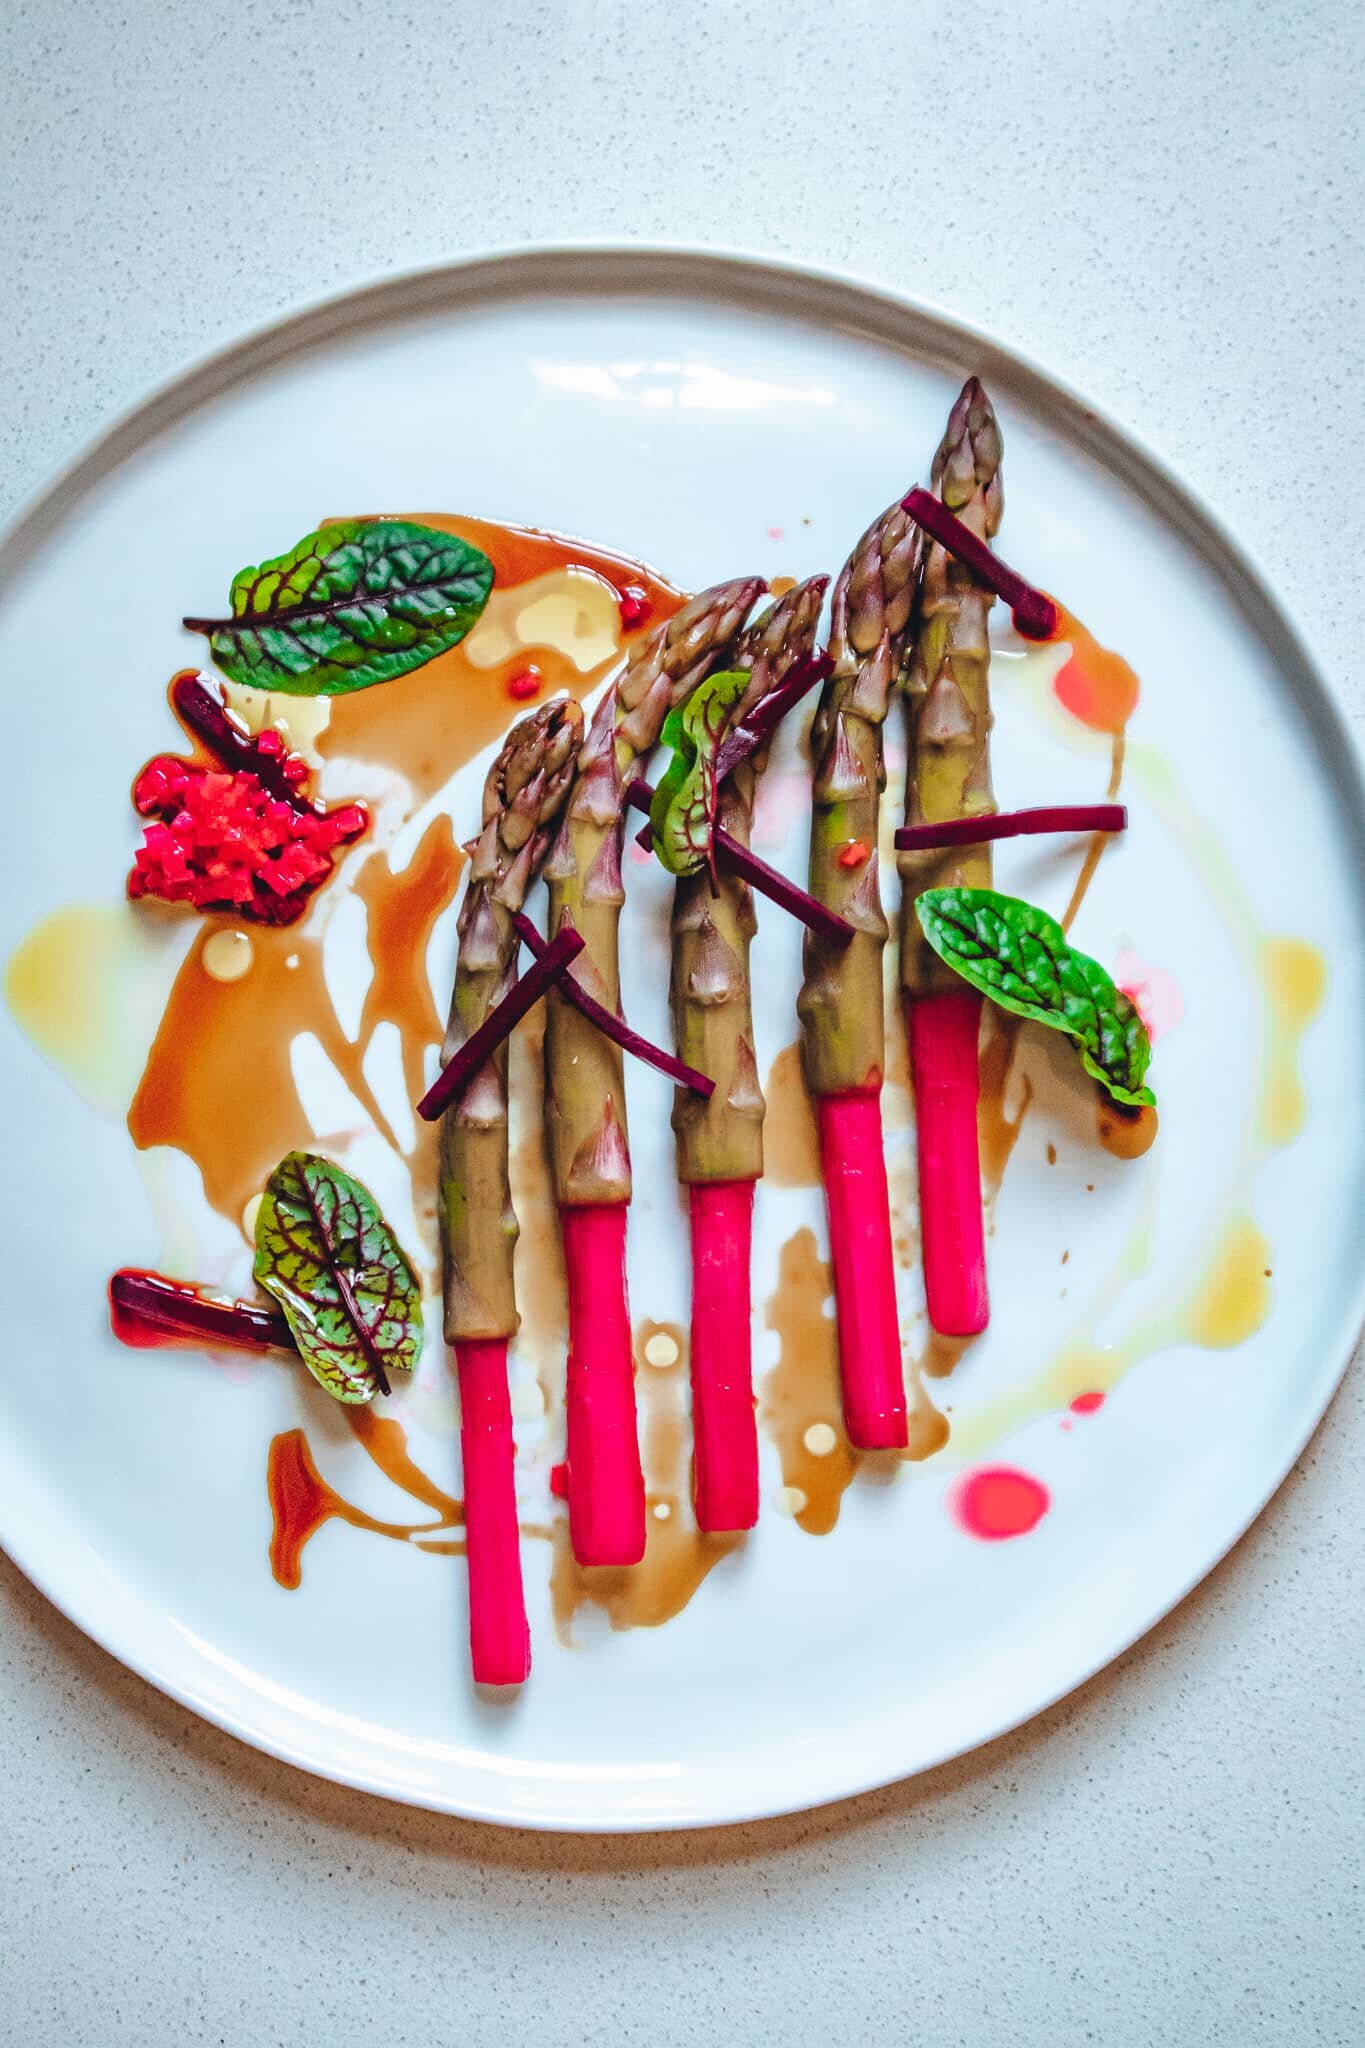 Pink Sous Vide Asparagus With Fermented Beets